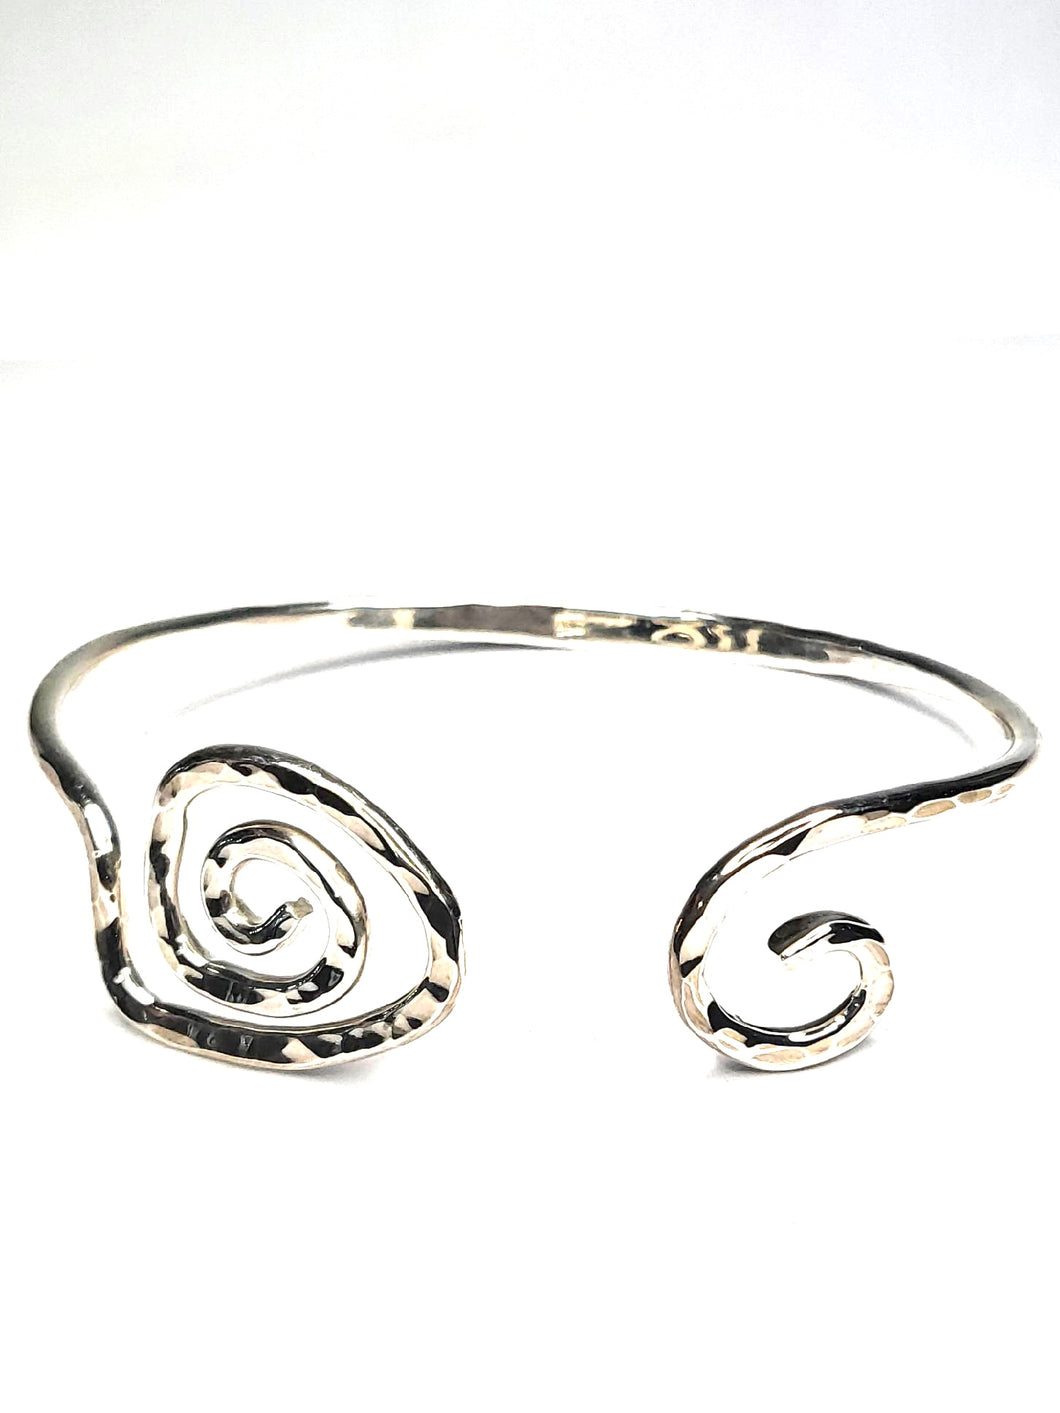 NEW Sterling Silver Hammered Cuff Bracelet